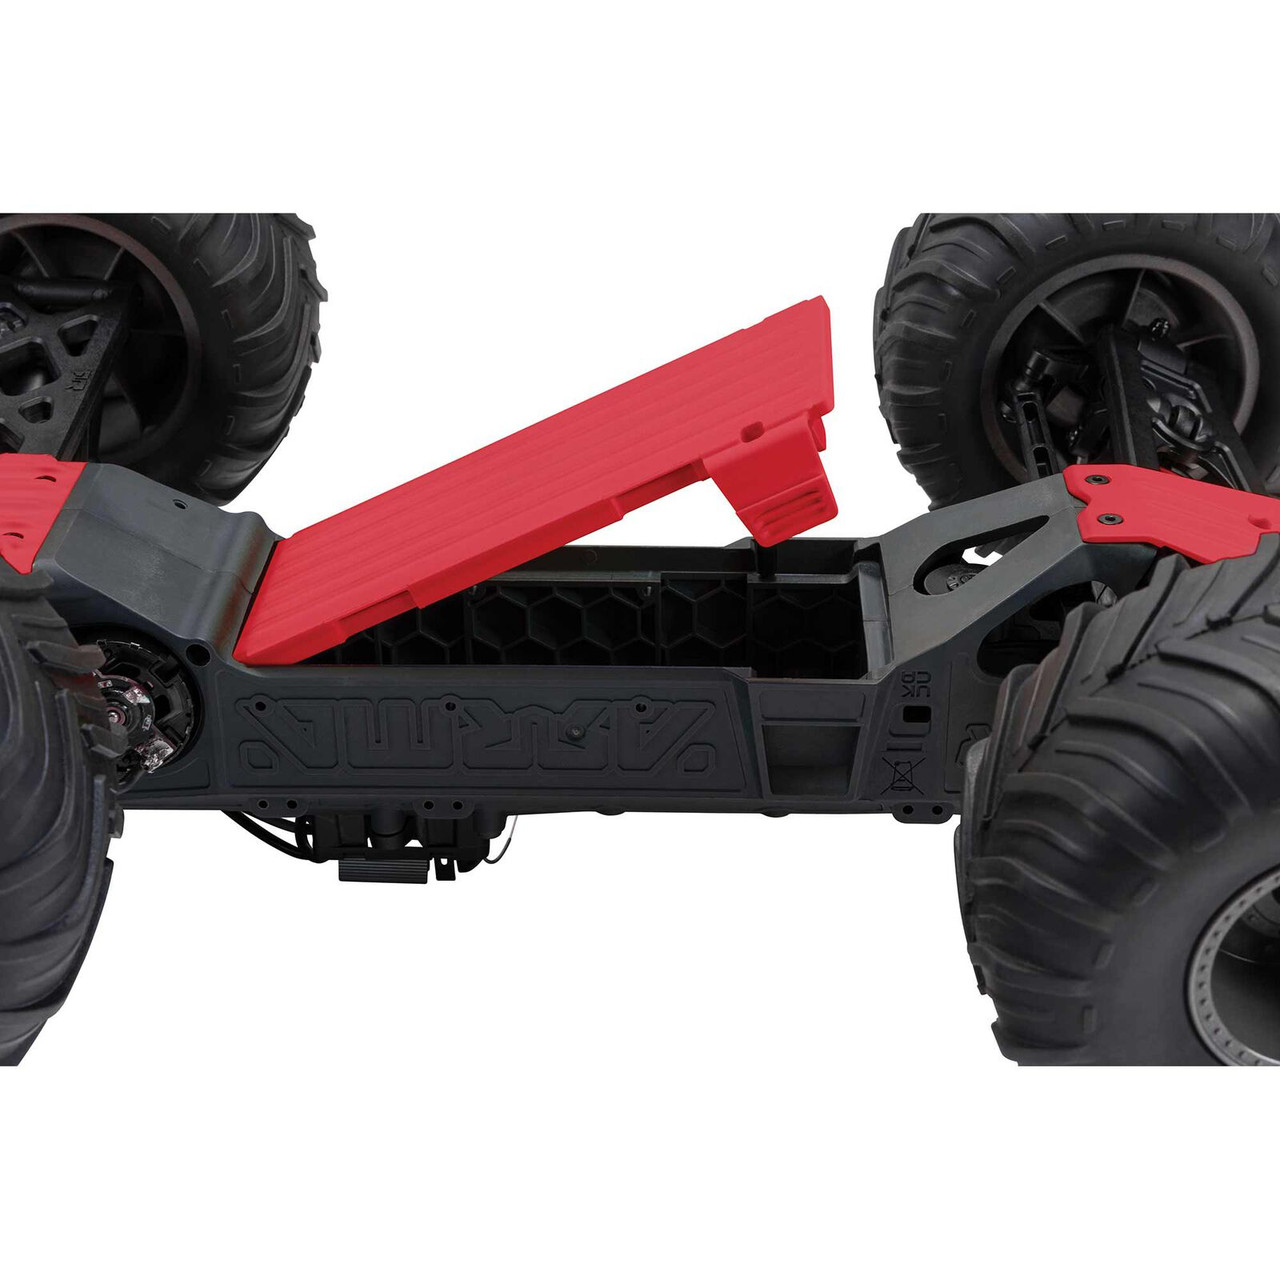 Arrma 1/10 GORGON 4X2 MEGA 550 Brushed Monster Truck RTR with Battery & Charger, Red